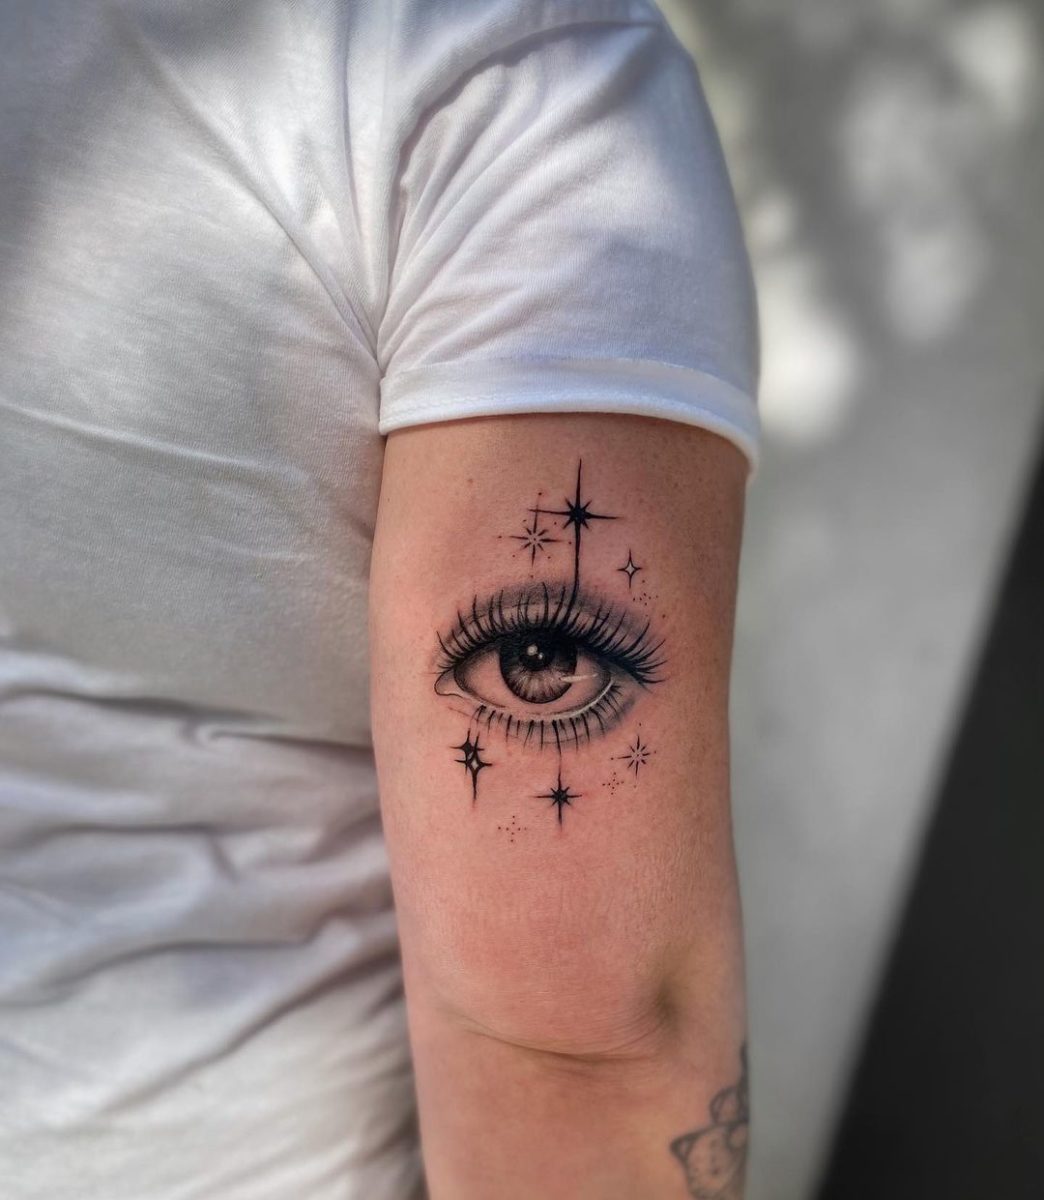 27 Star Tattoos And Ideas For A Cool Design